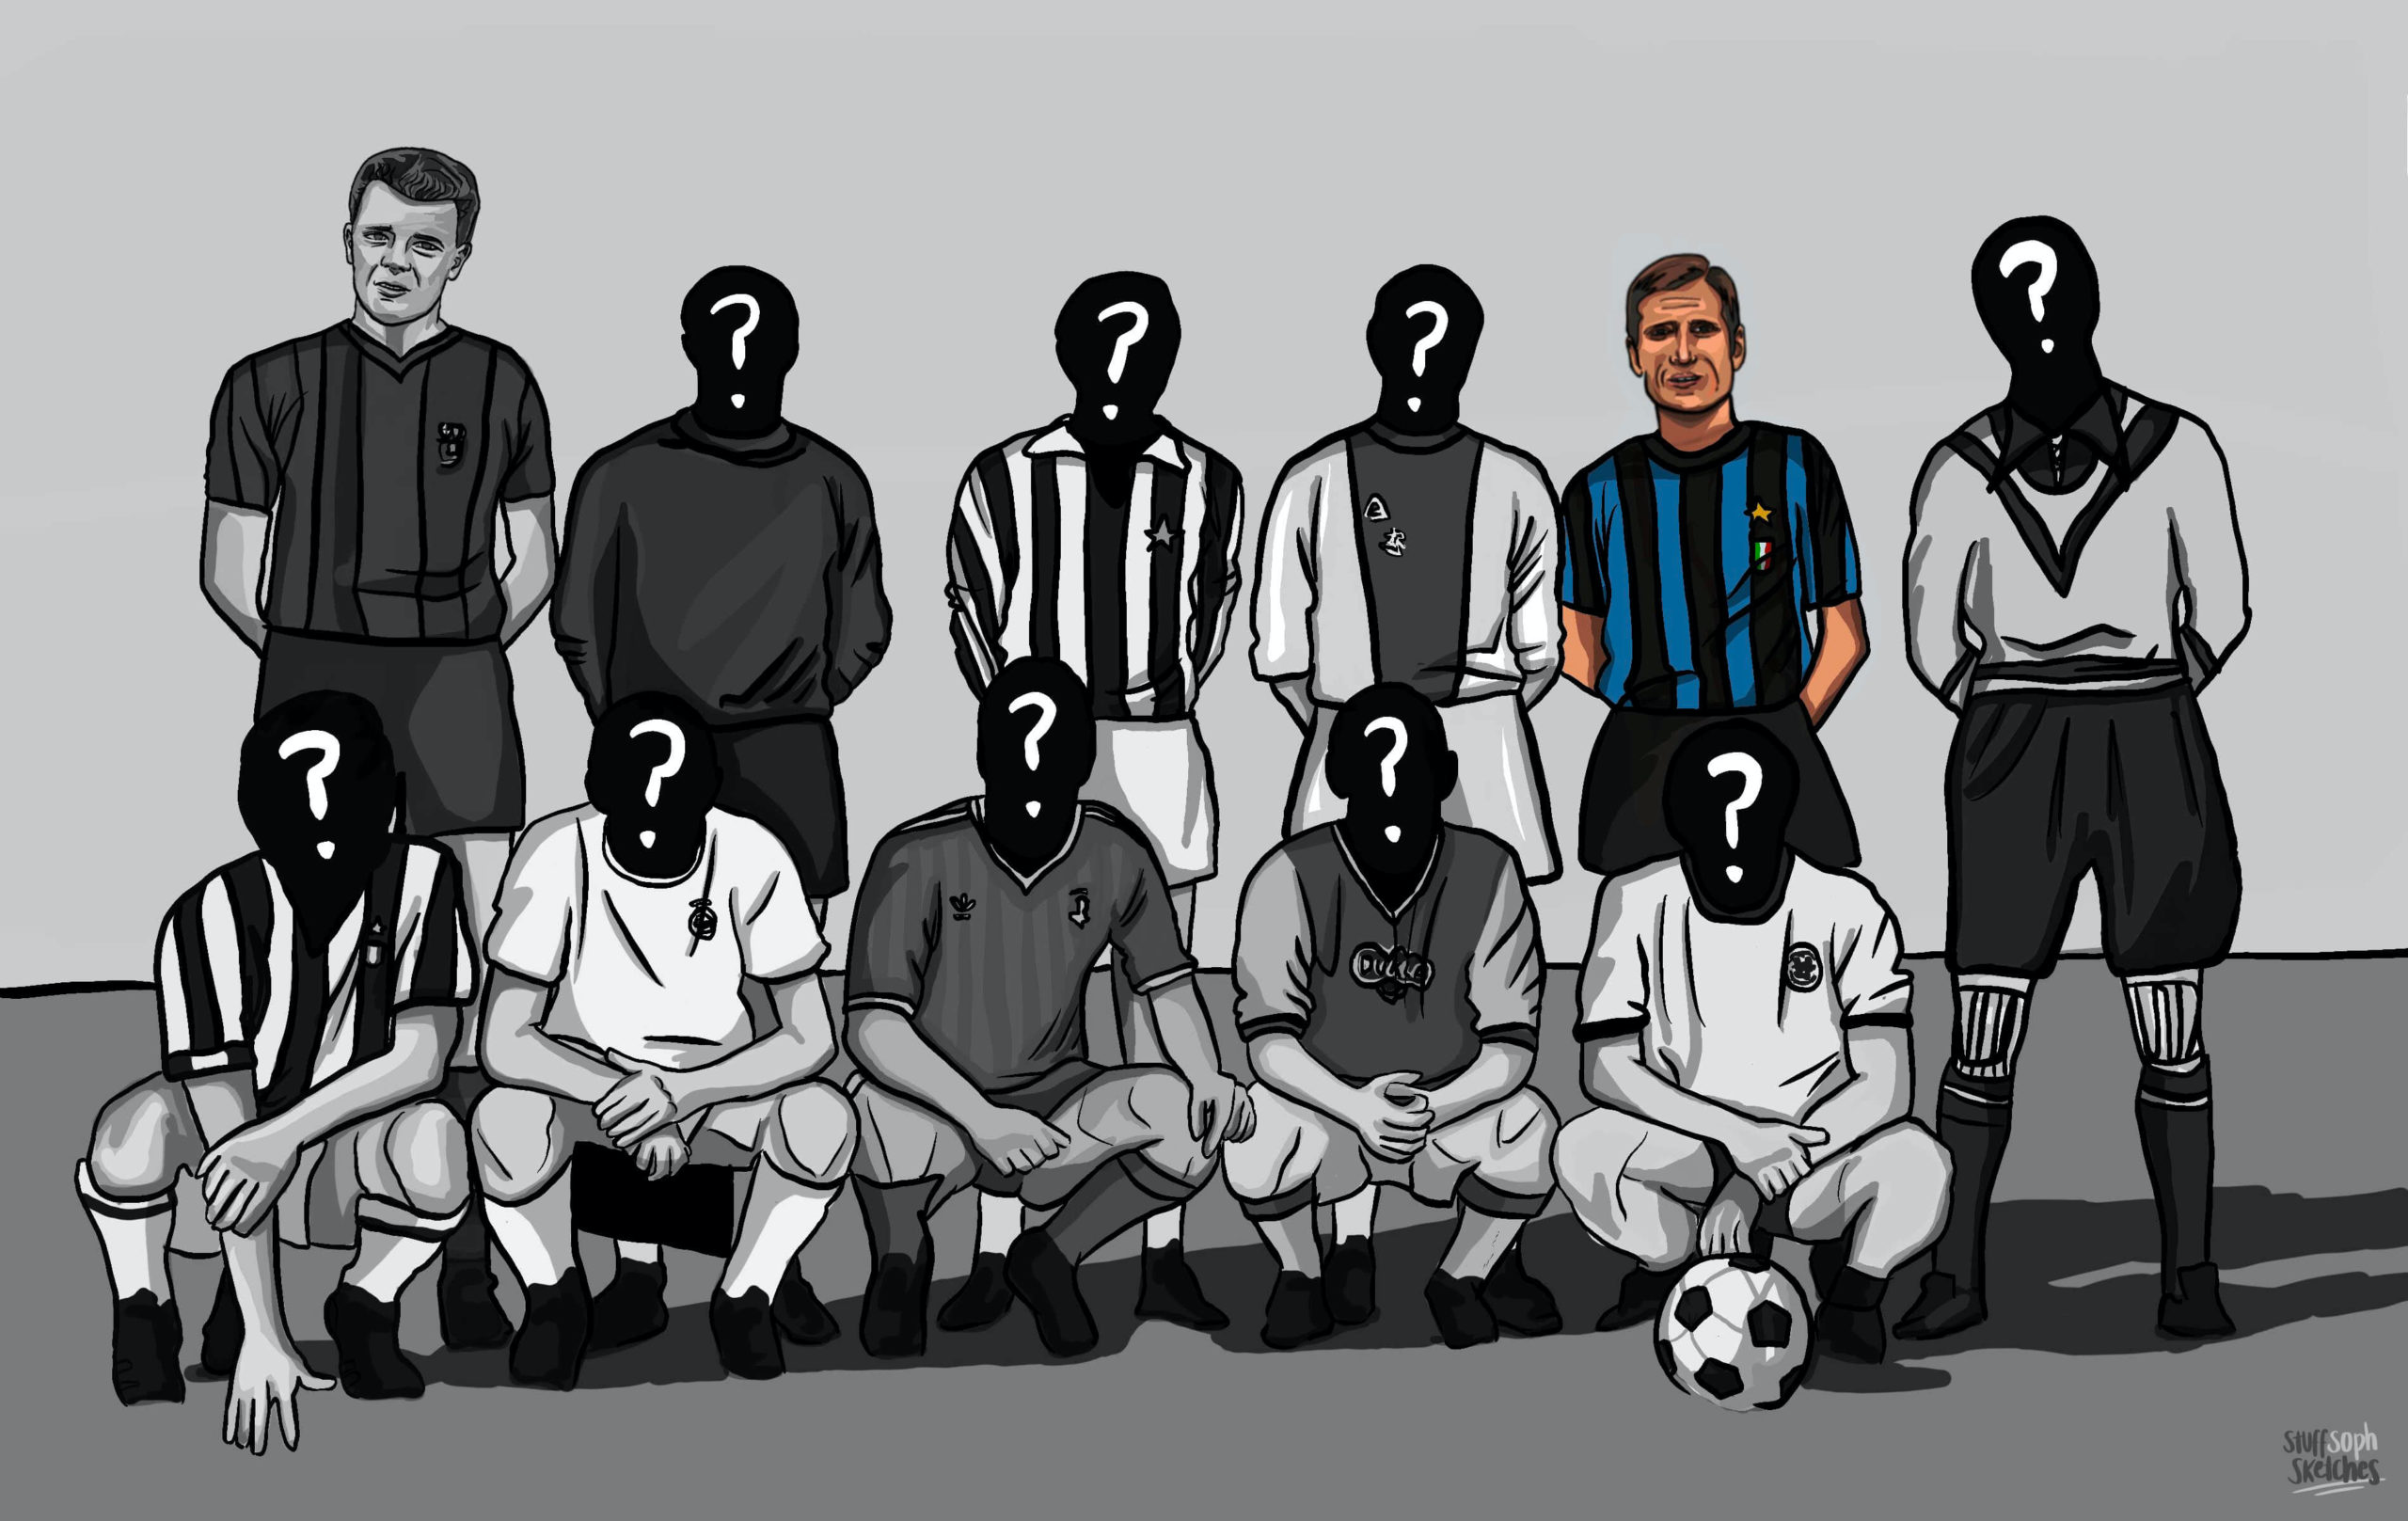 Giancito Facchetti in colour, amongst the forgotten eleven lineup in black and white